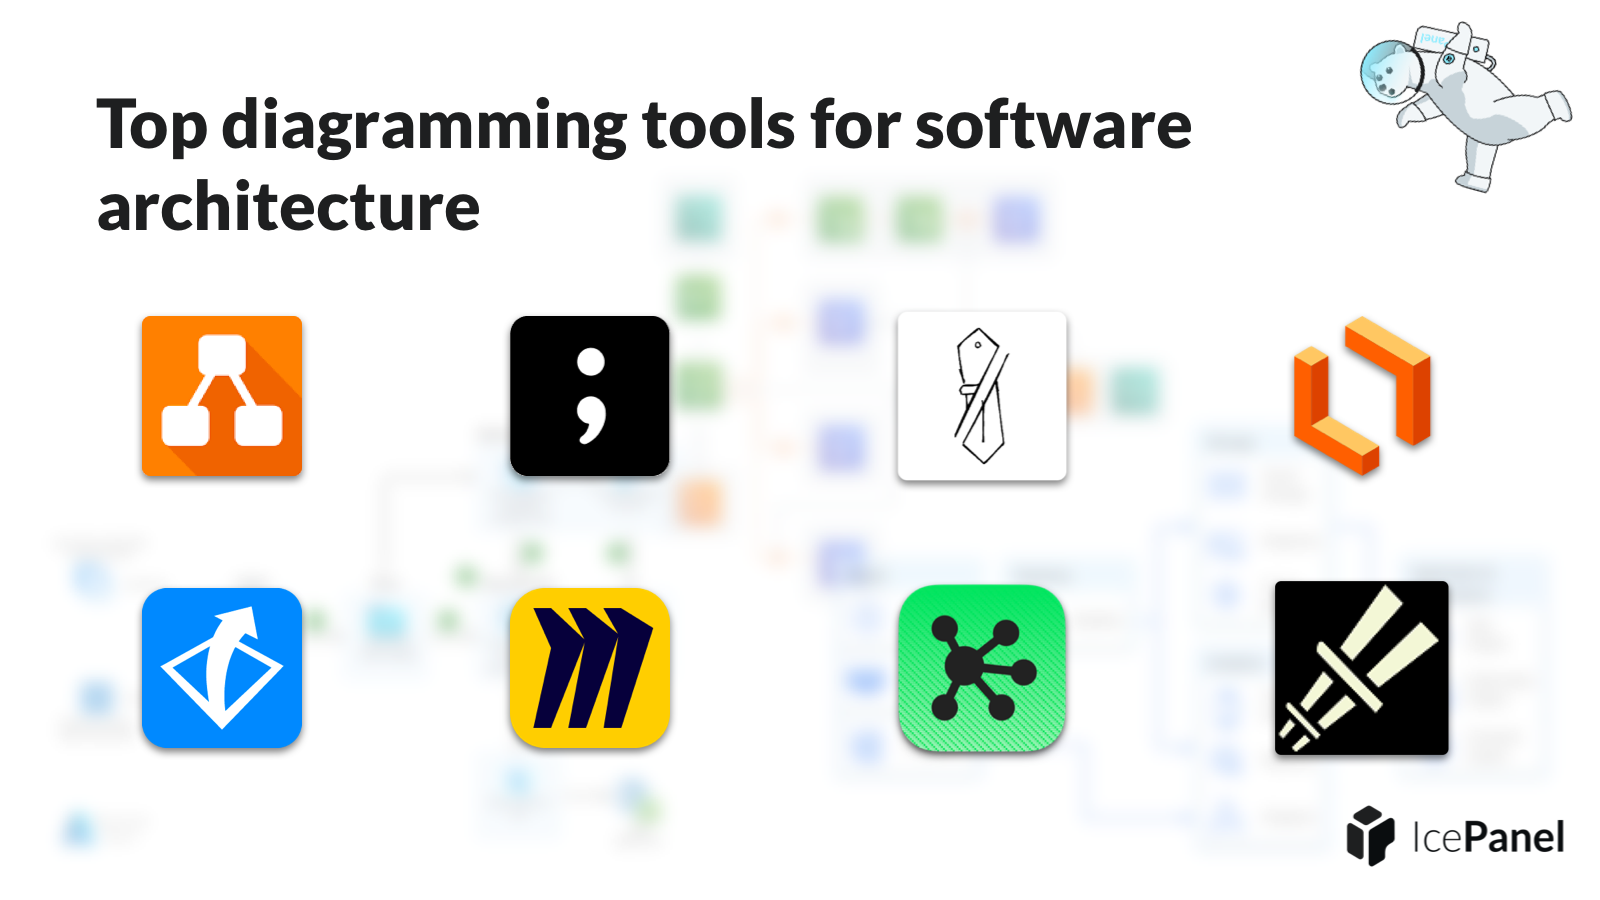 Top 8 diagramming tools for software architecture | IcePanel Blog